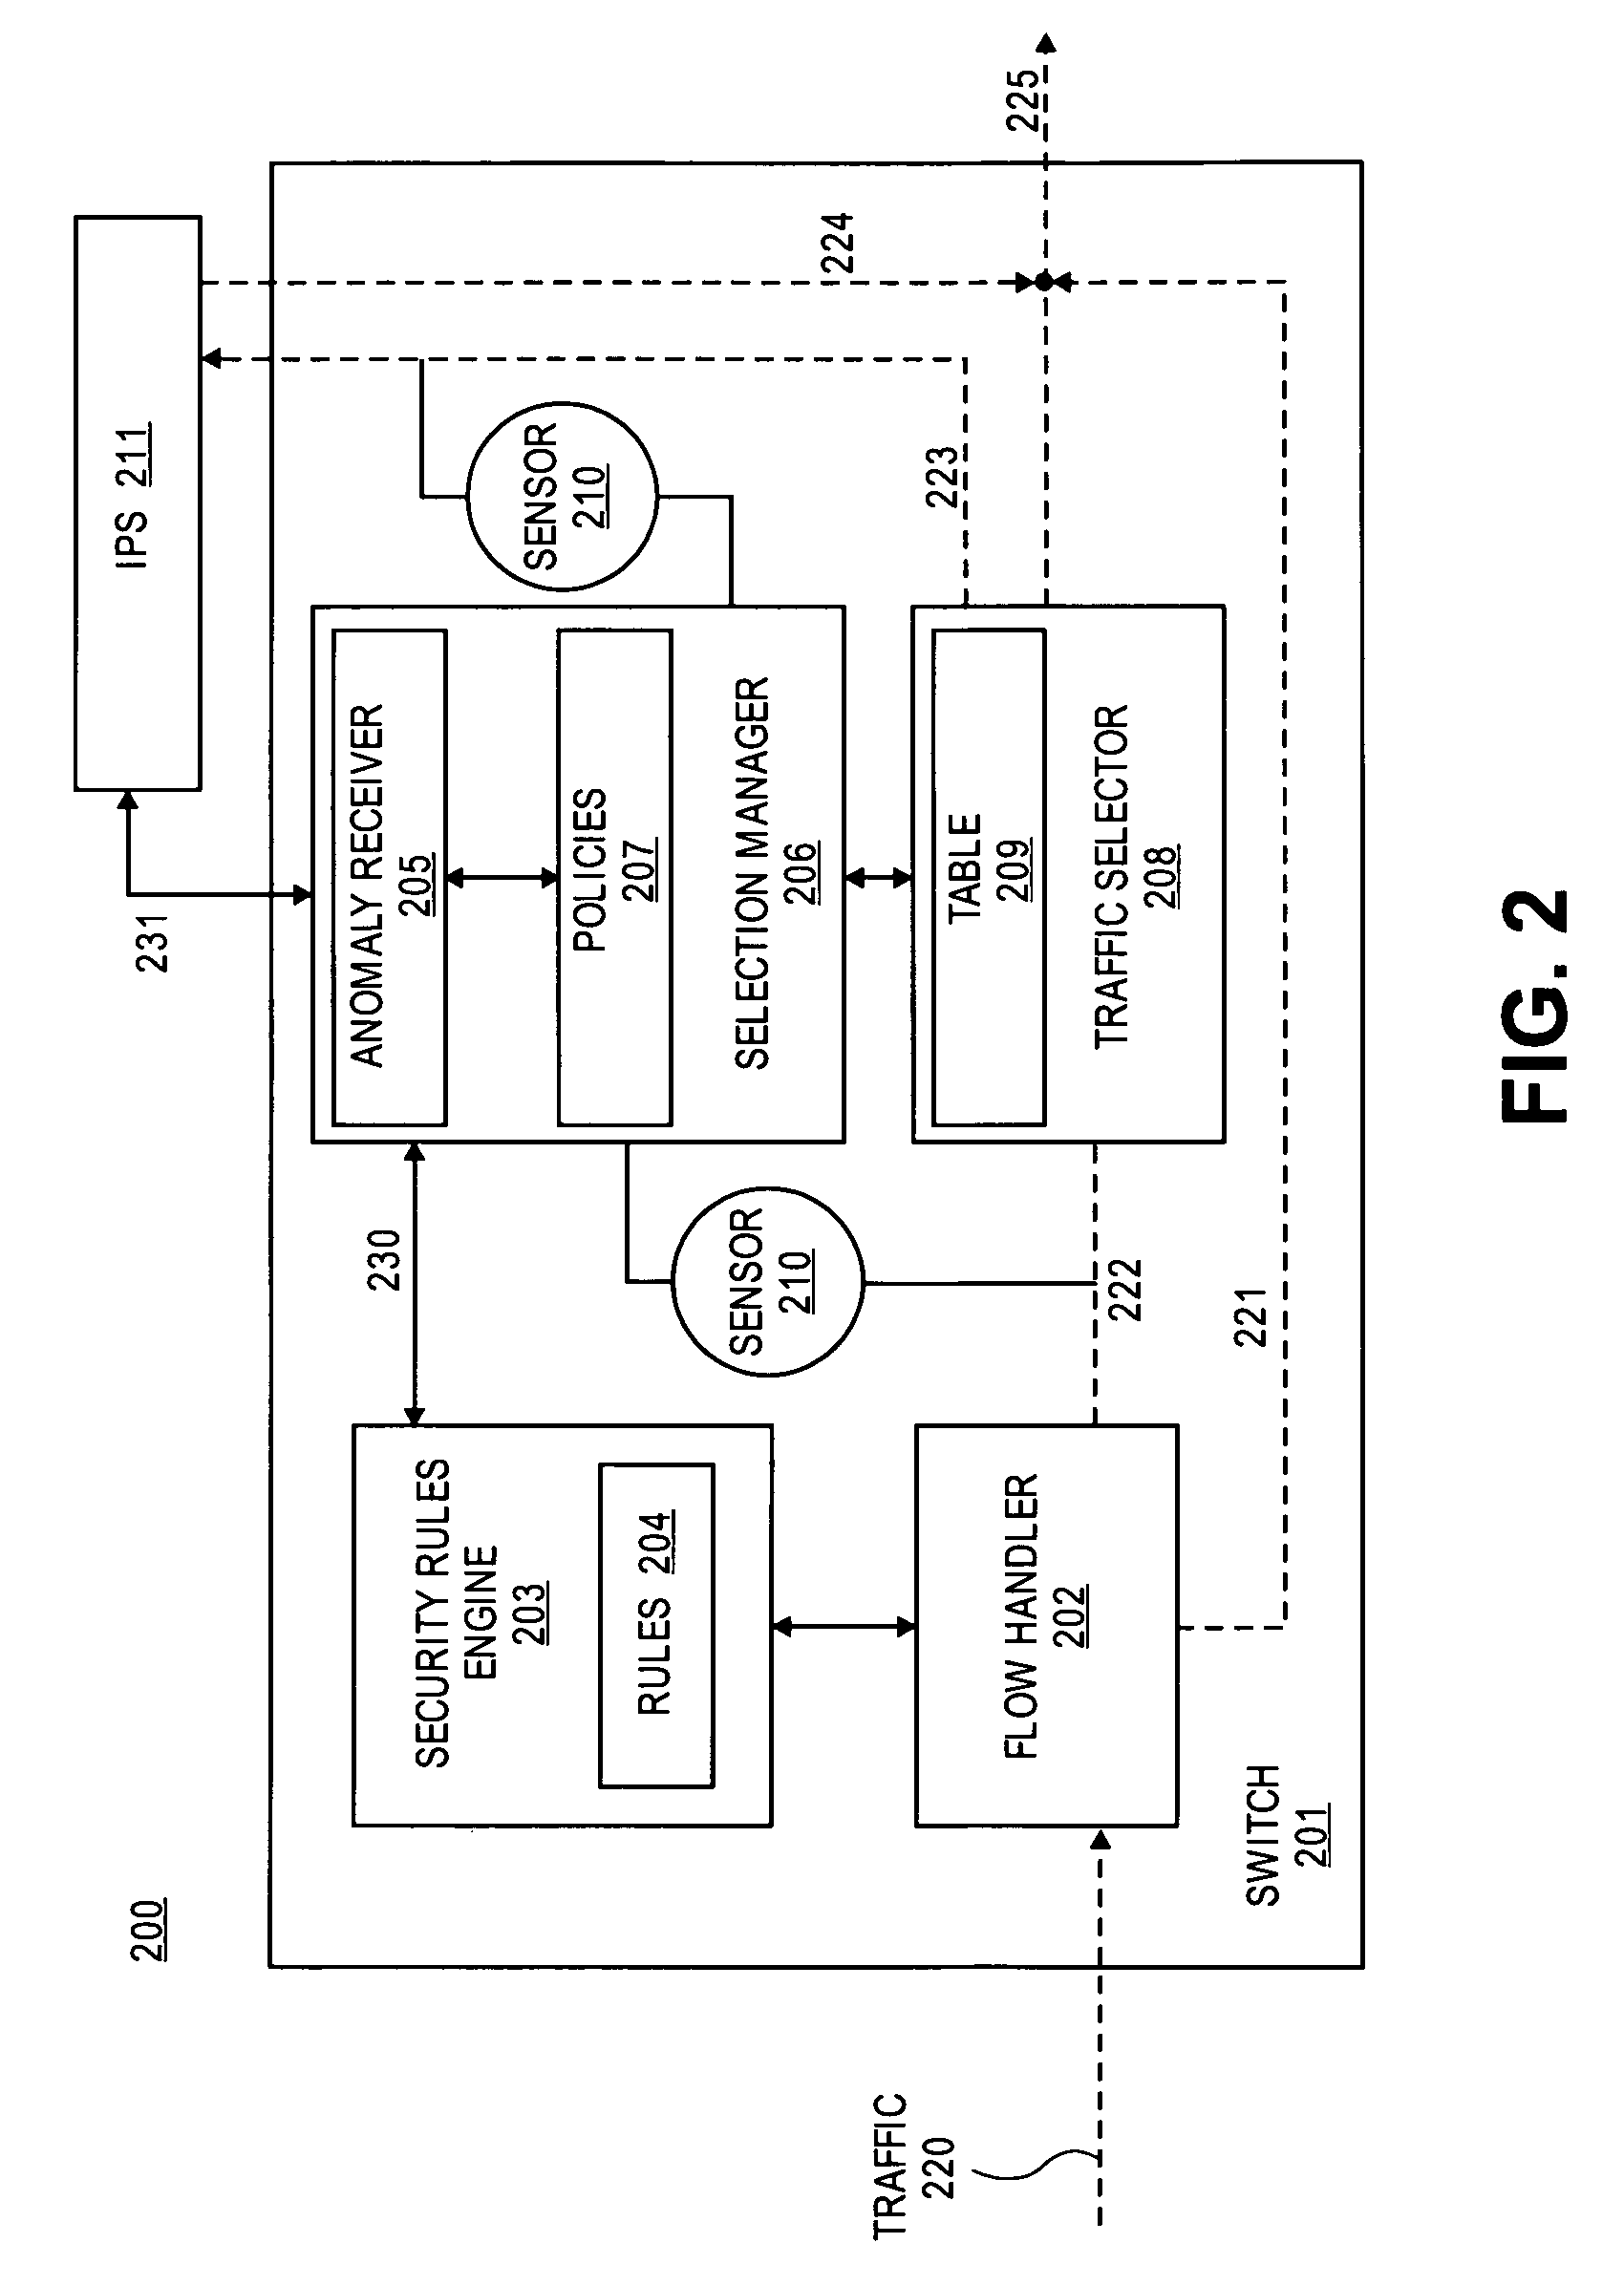 Method and apparatus for dynamic anomaly-based updates to traffic selection policies in a switch